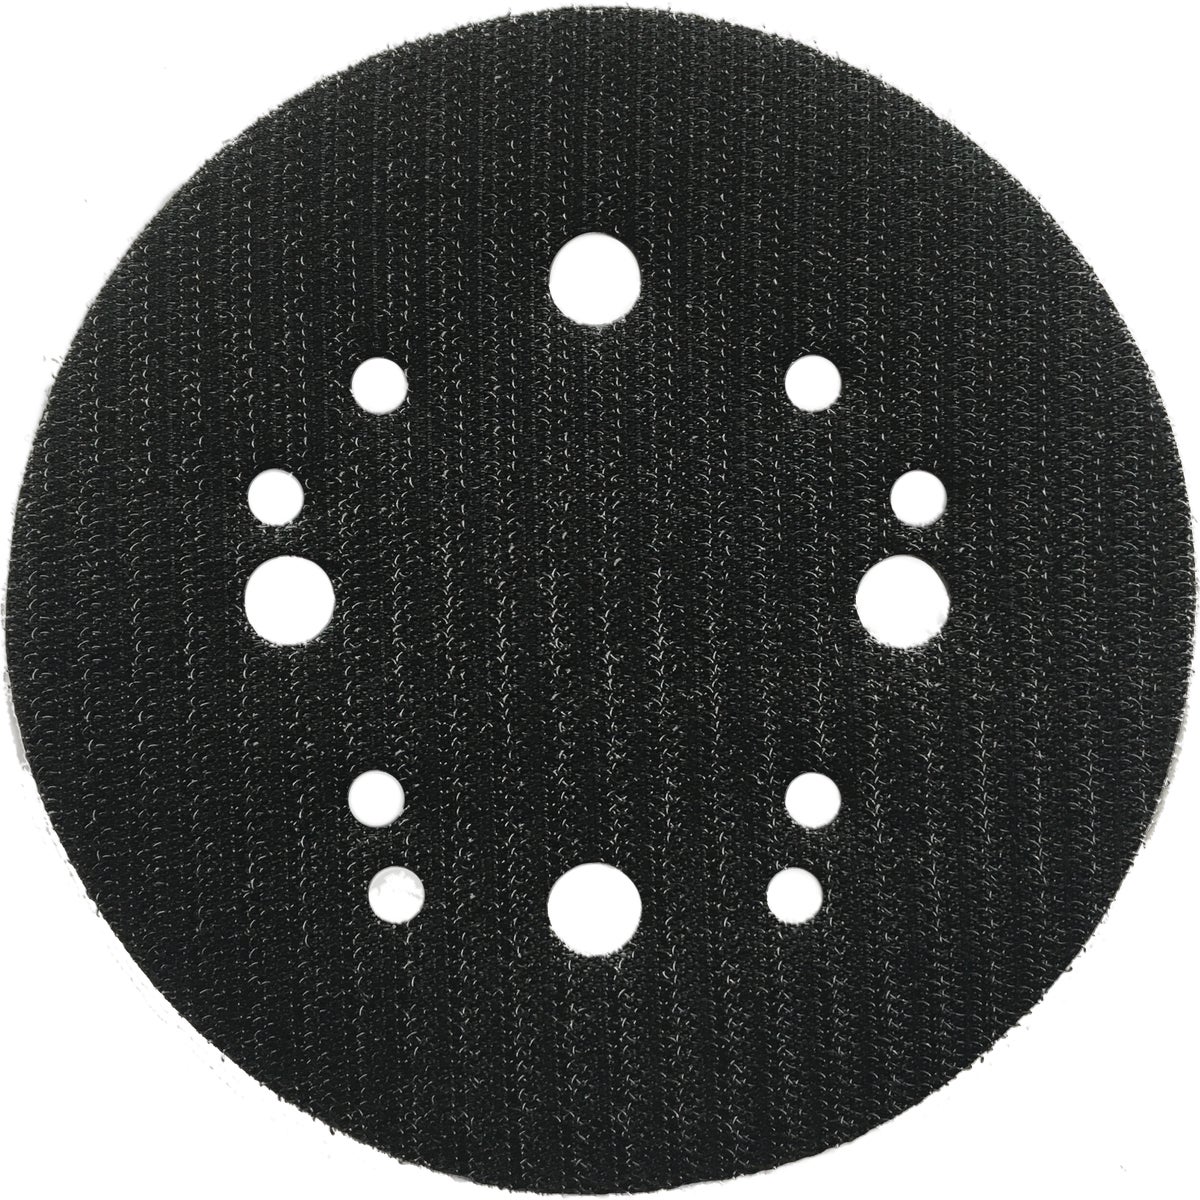 Item 387987, Connection pad for SandNet discs for easy attachment to 5 and 8-hole random